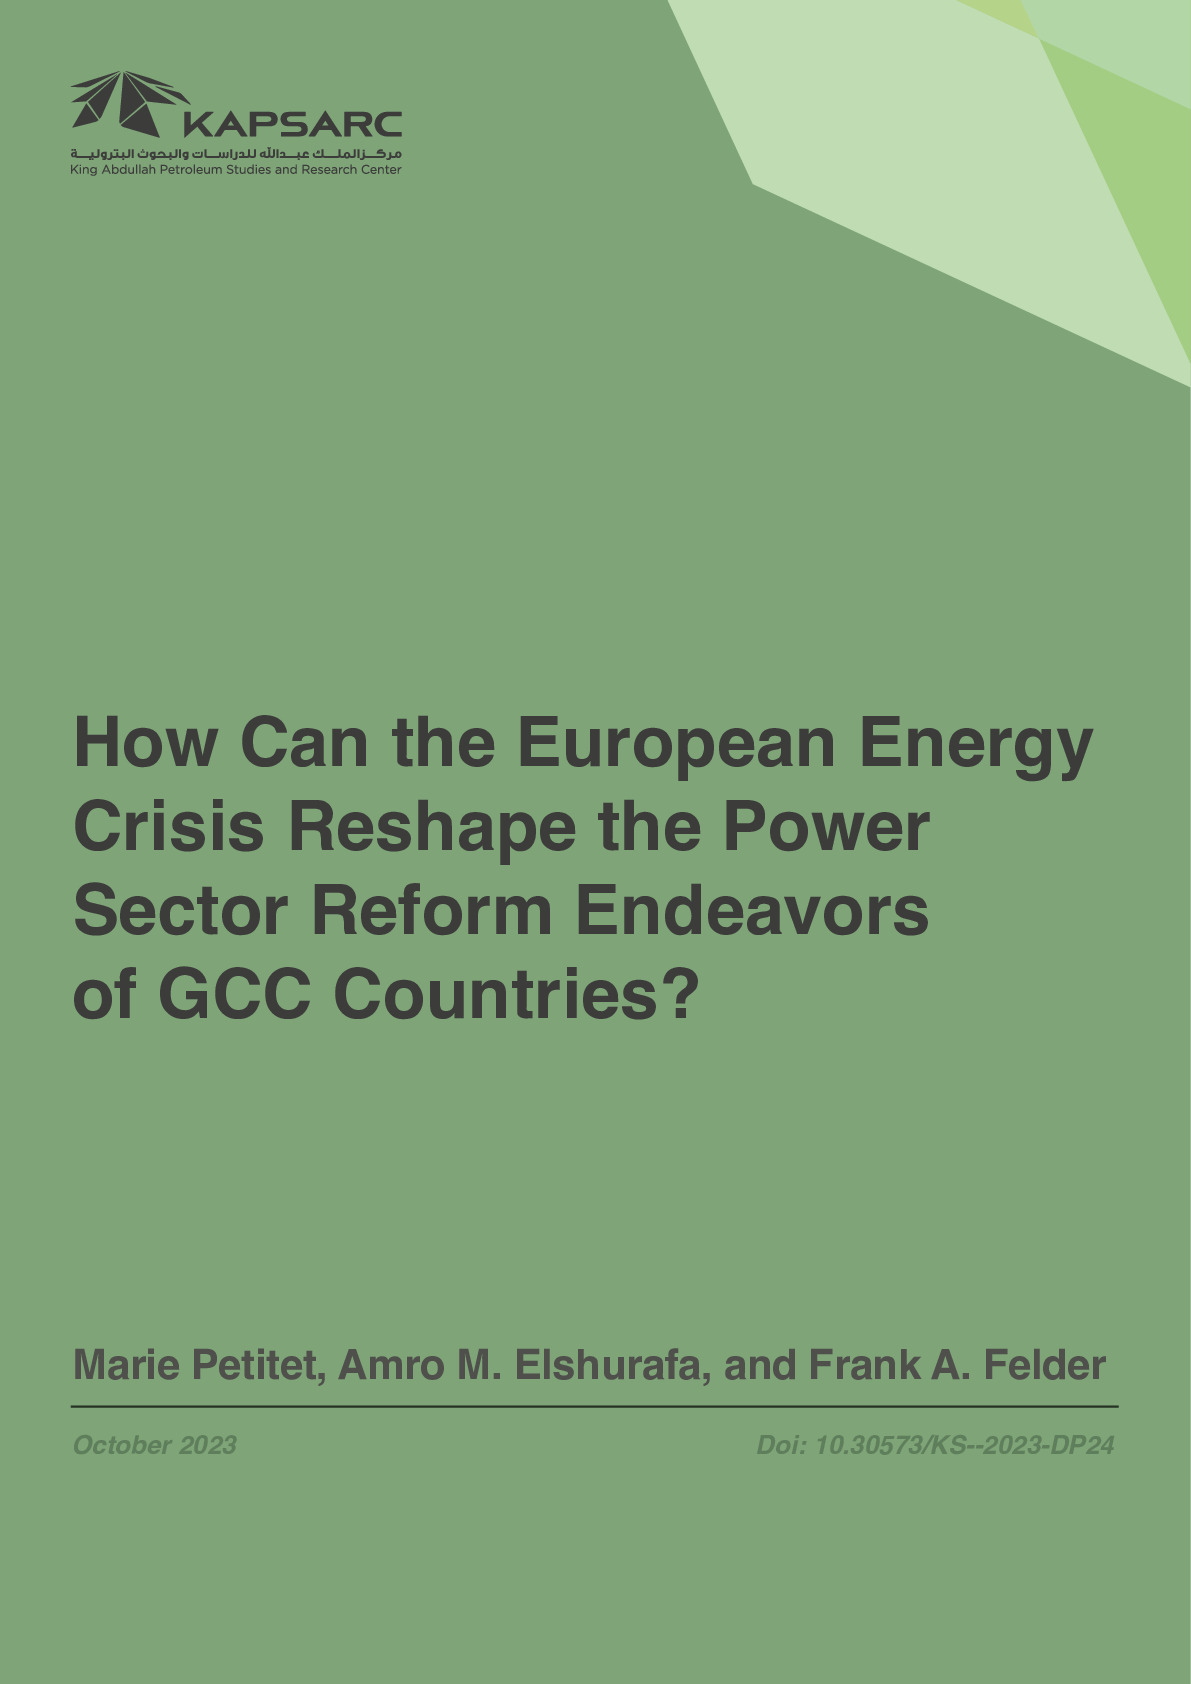 How Can the European Energy Crisis Reshape the Power Sector Reform Endeavors of GCC Countries?